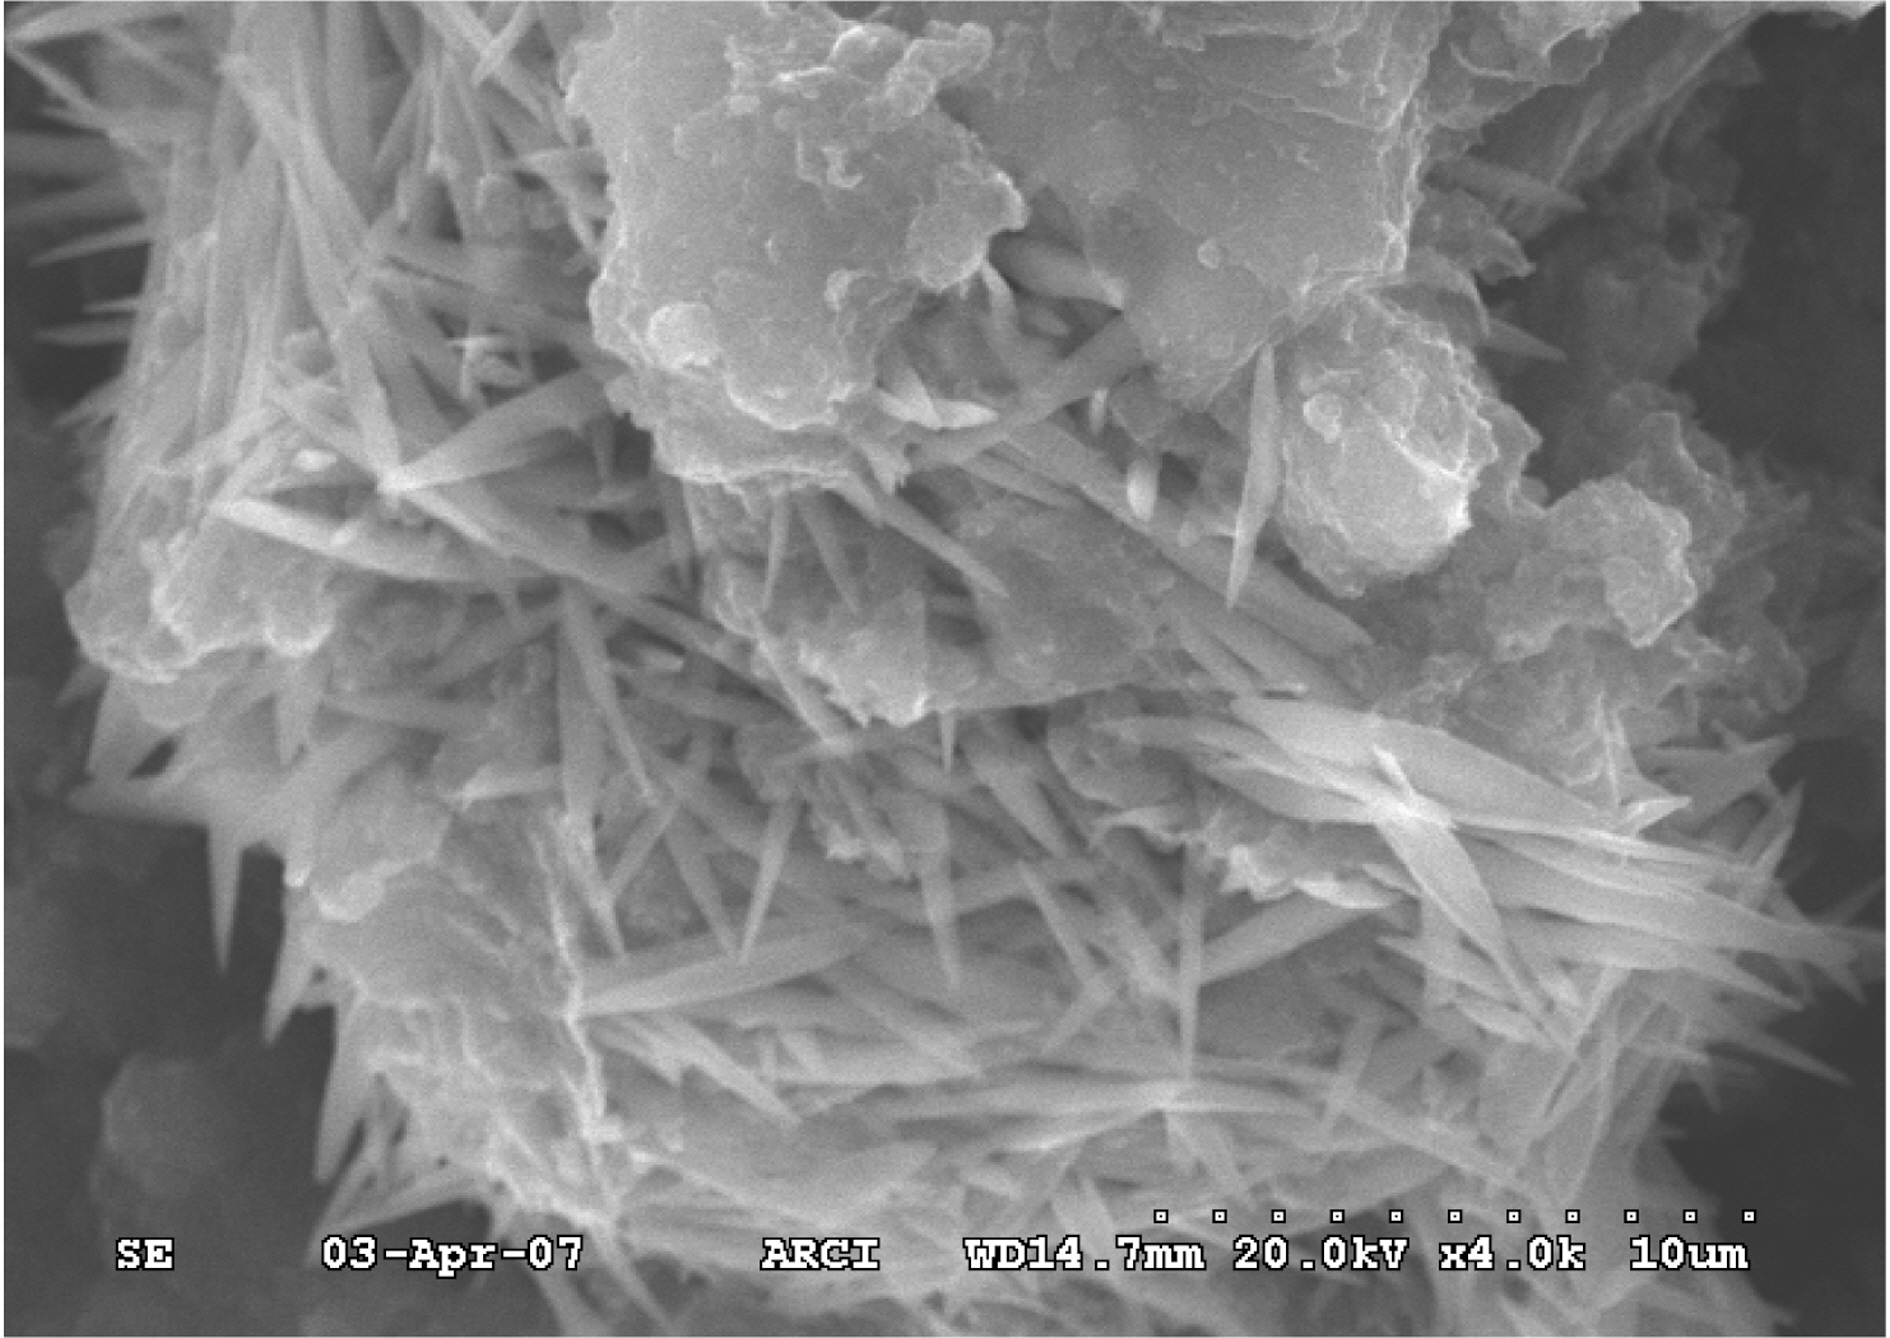 Chemical Treatment for longer period to carbon nanotubes.